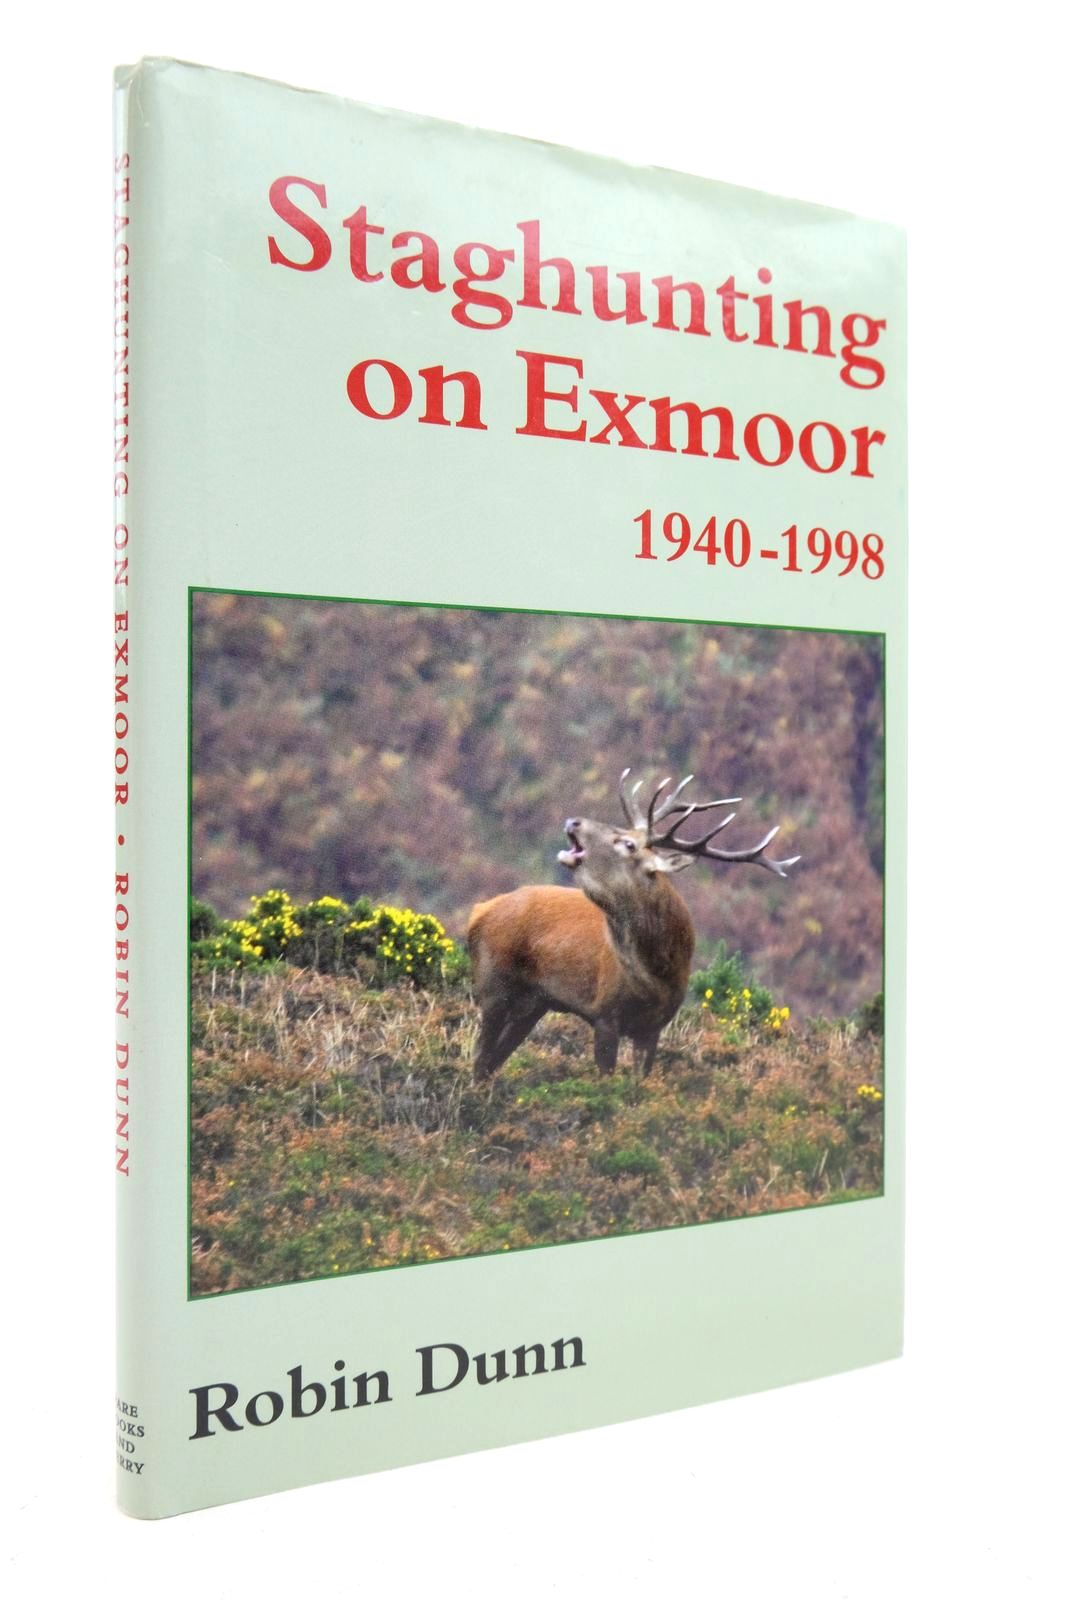 Photo of STAGHUNTING ON EXMOOR 1940 - 1998 written by Dunn, Robin published by Rare Books And Berry (STOCK CODE: 2139623)  for sale by Stella & Rose's Books